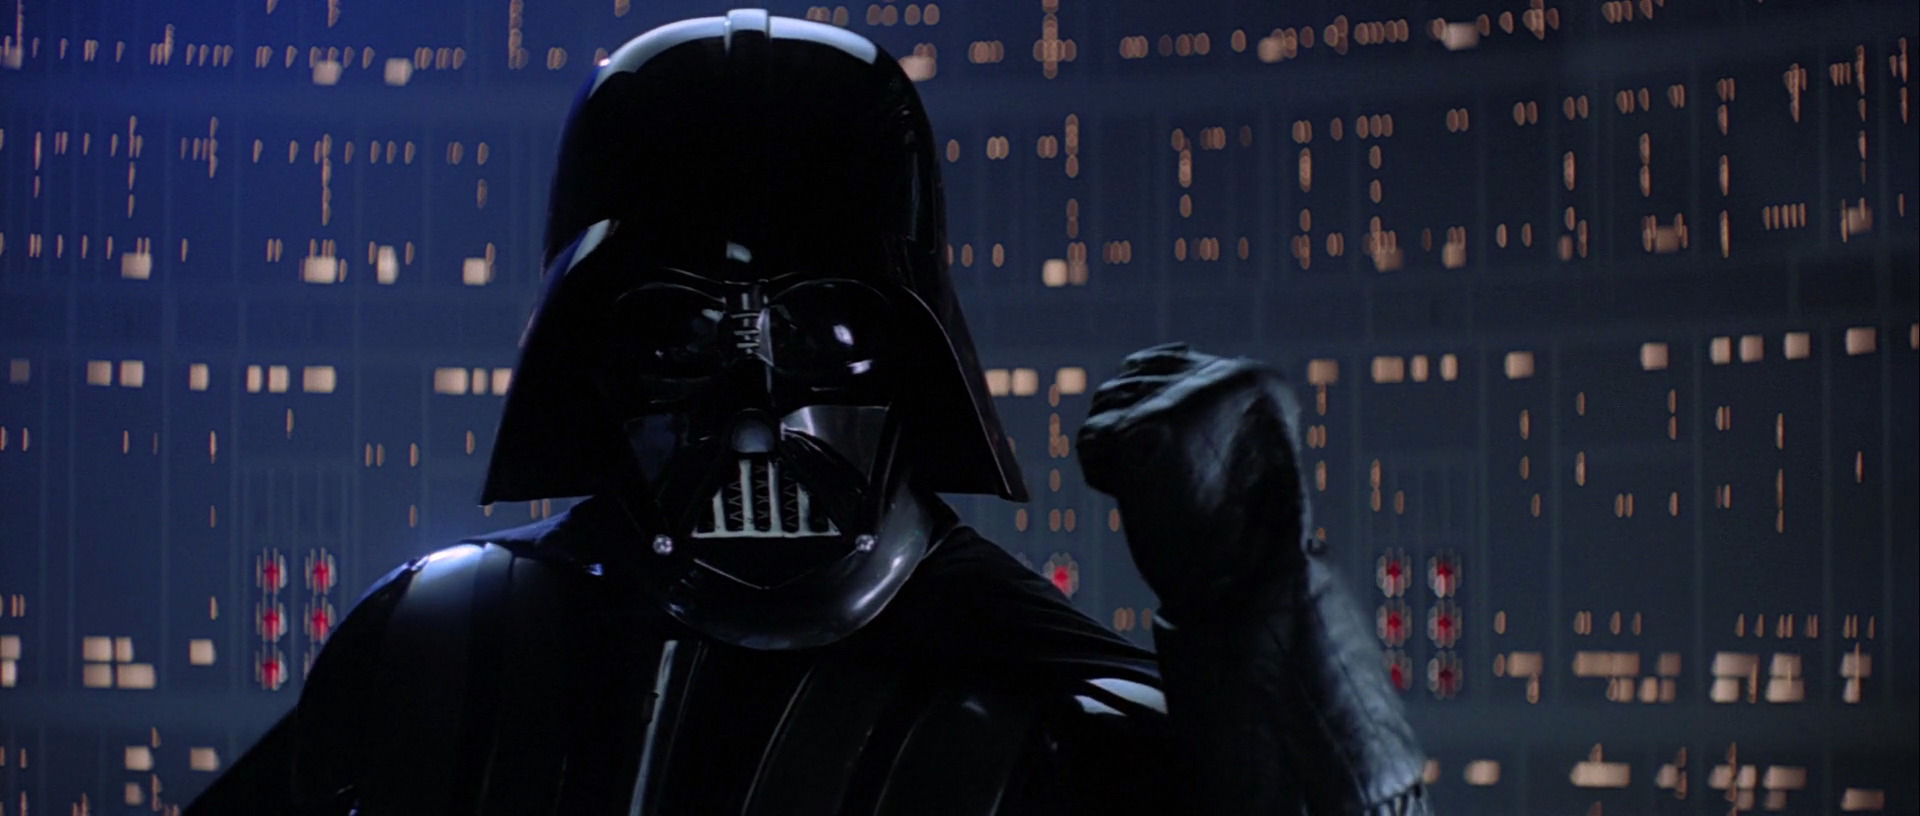 Star Wars: Check Out This Empire Strikes Back Trailer In the Style Of The Force Awakens